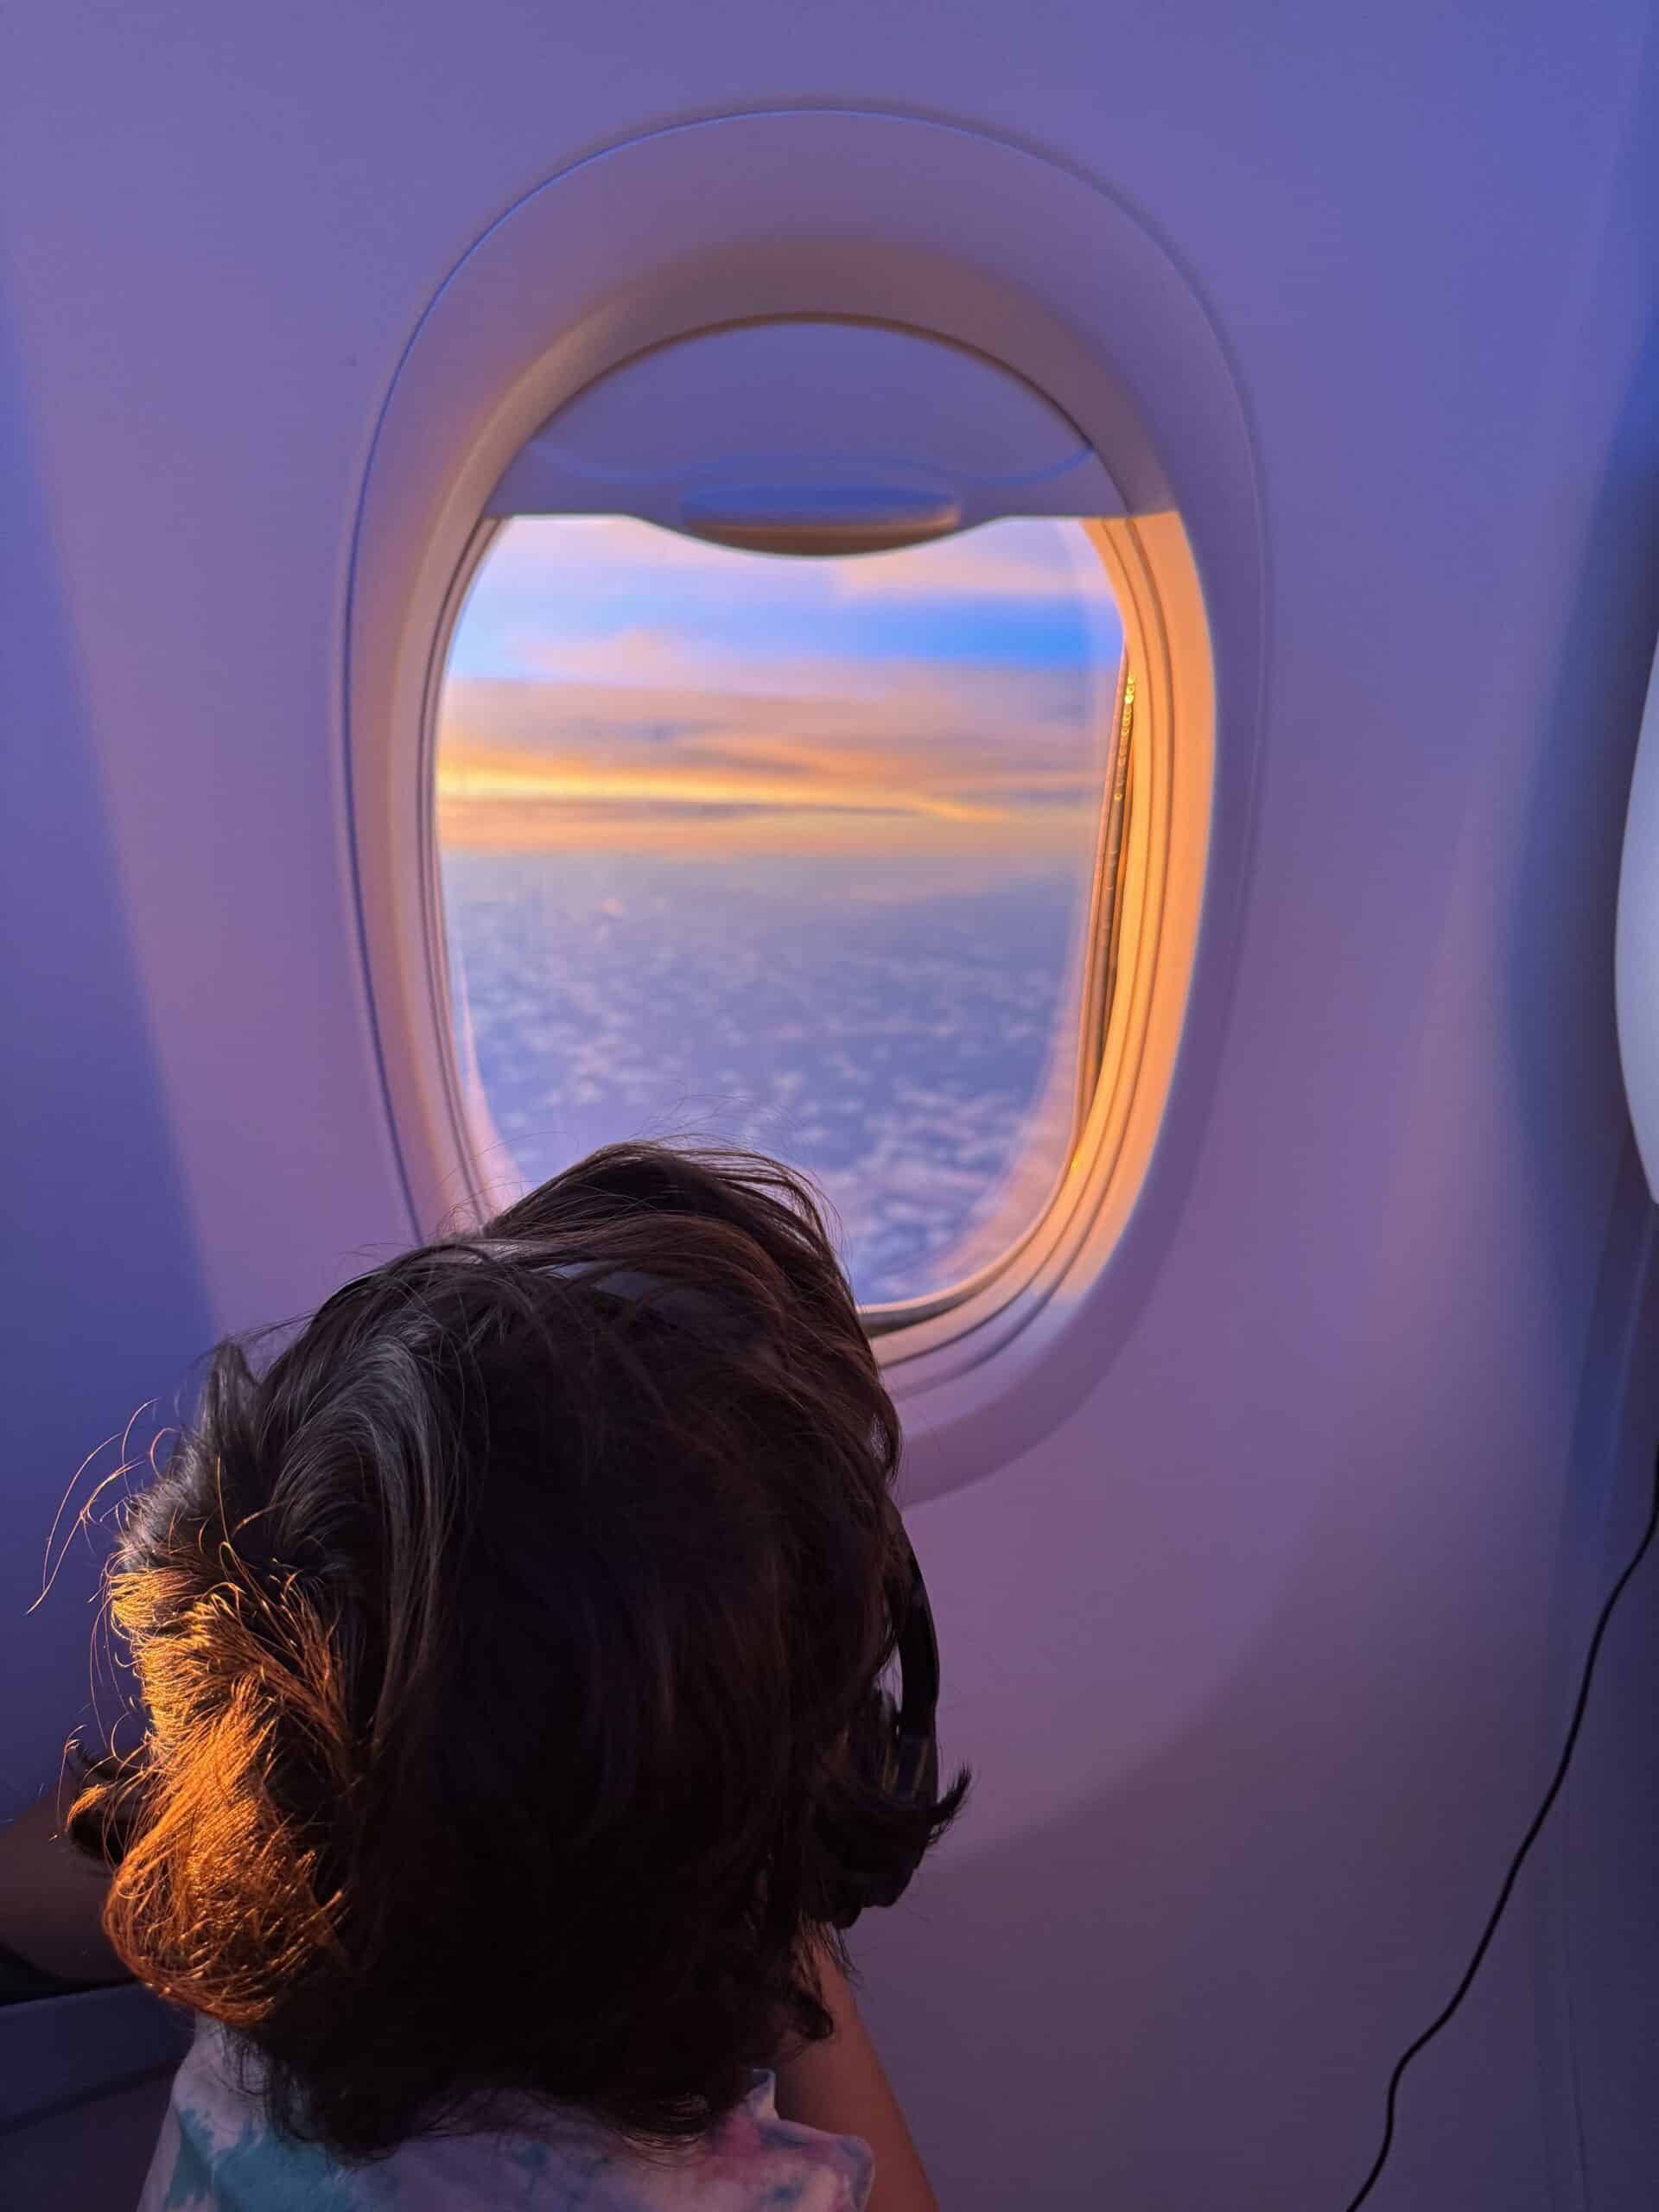 Young child looking out airplane window.